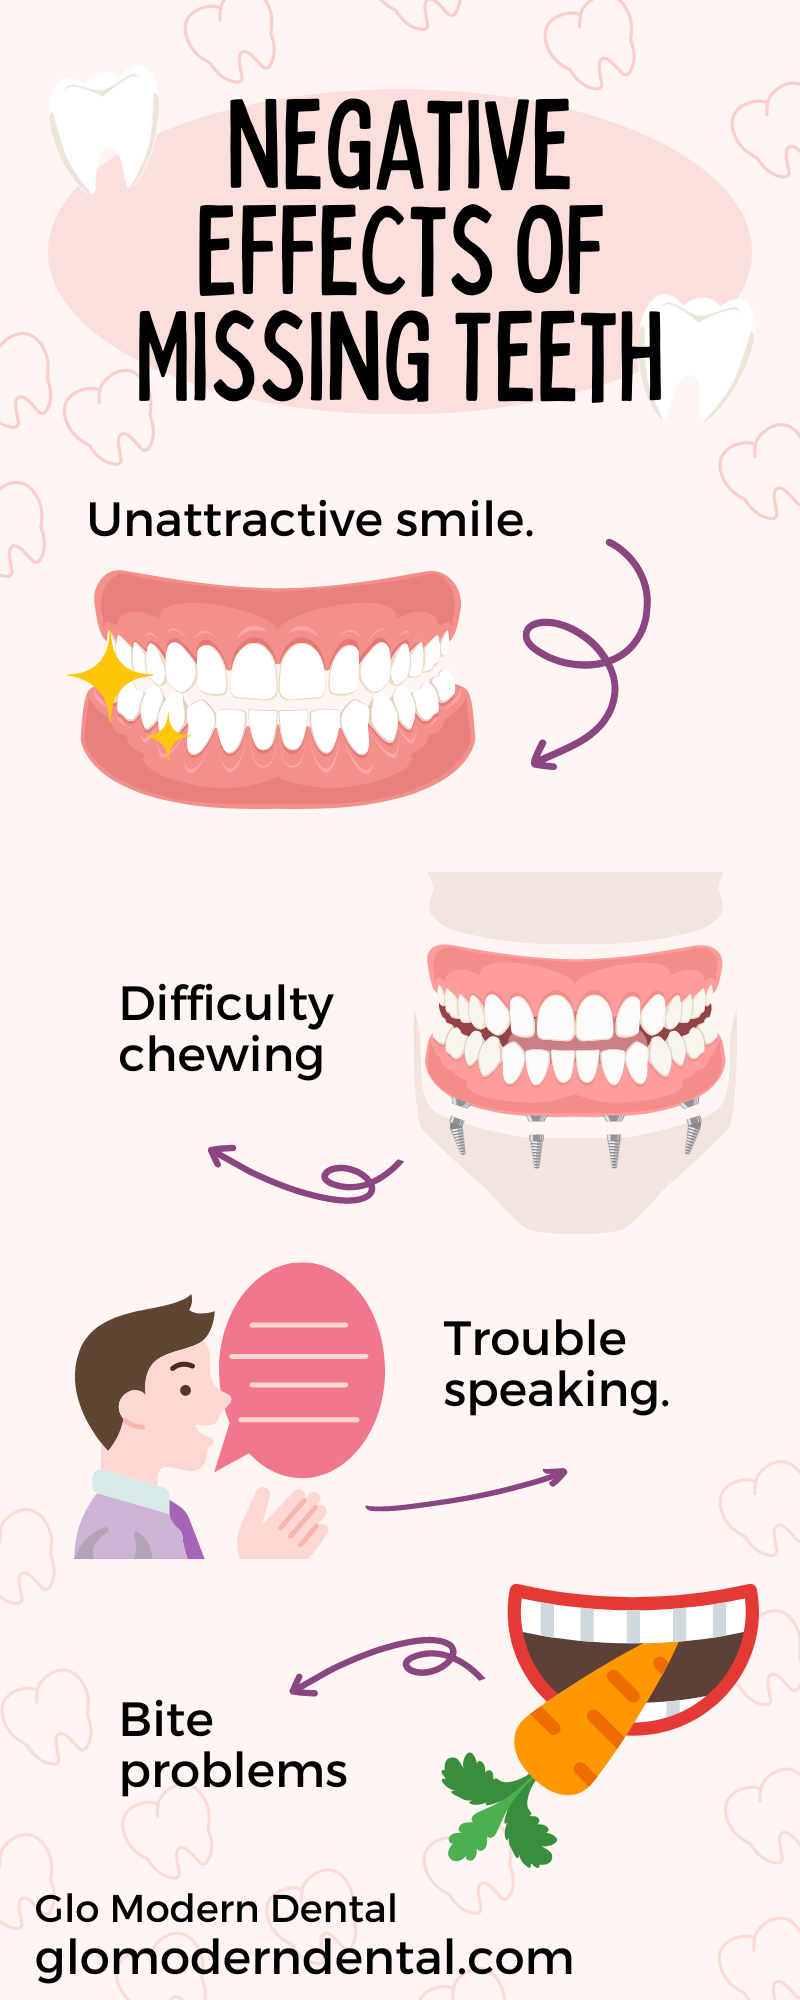 Negative Effects of Missing Teeth Infographic